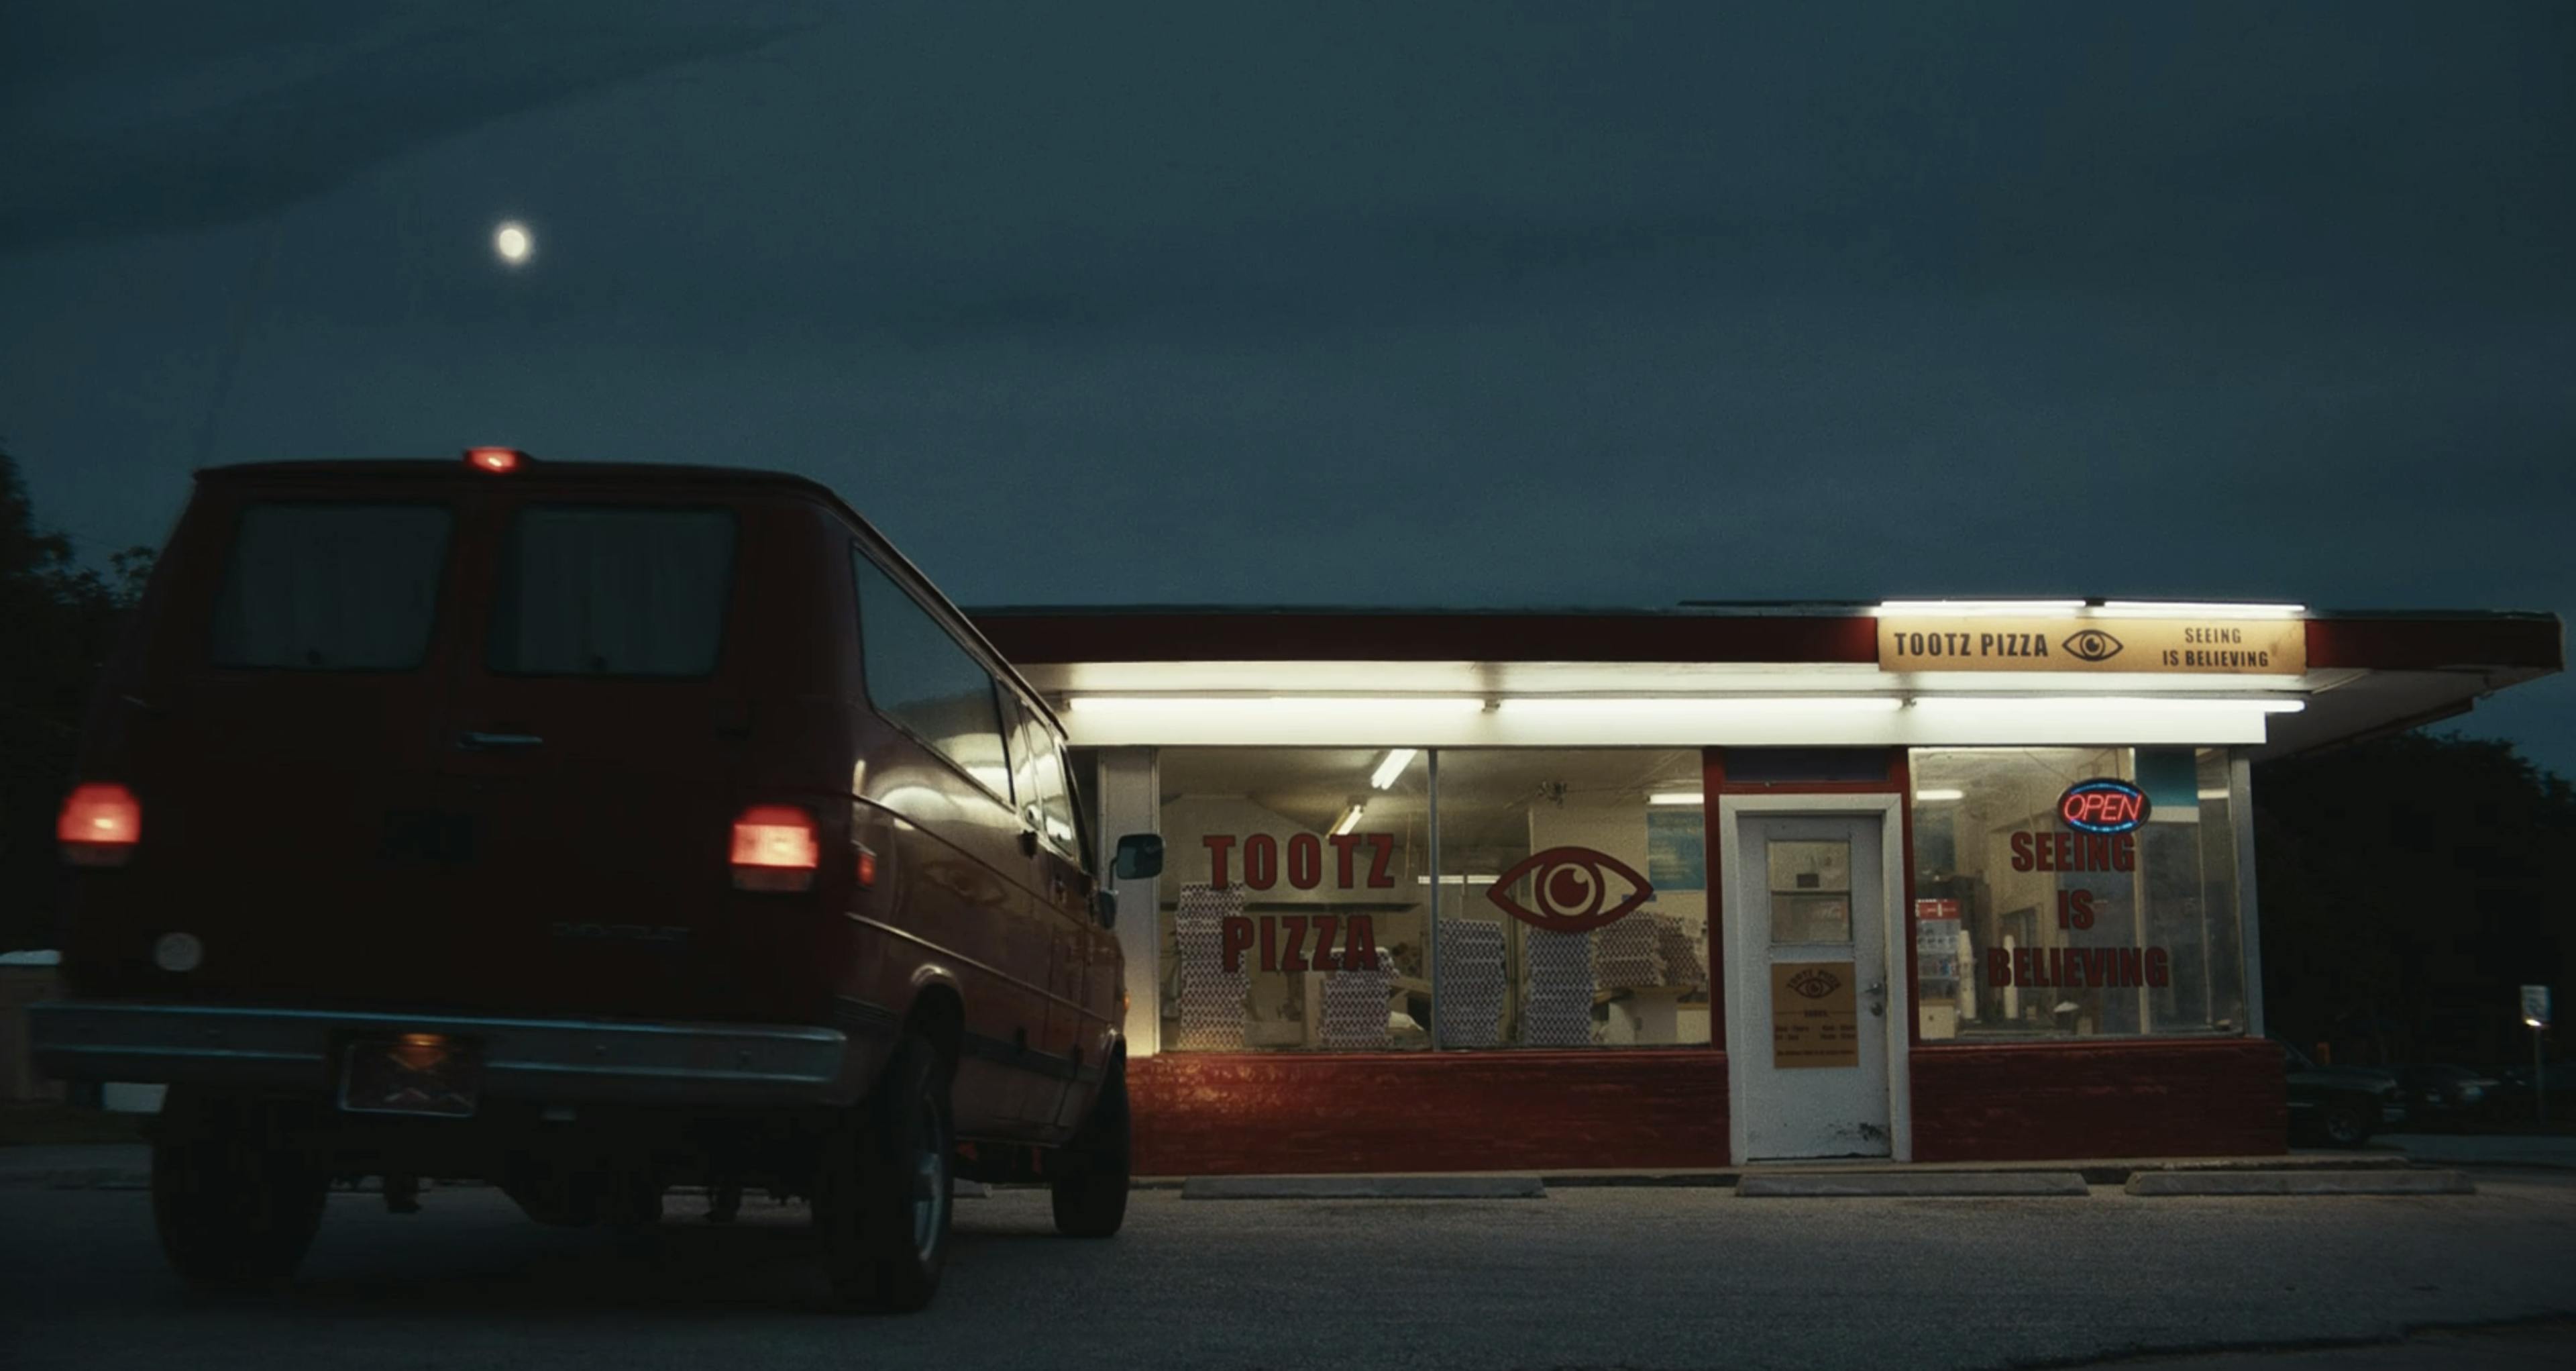 A red van in front of a pizza shop